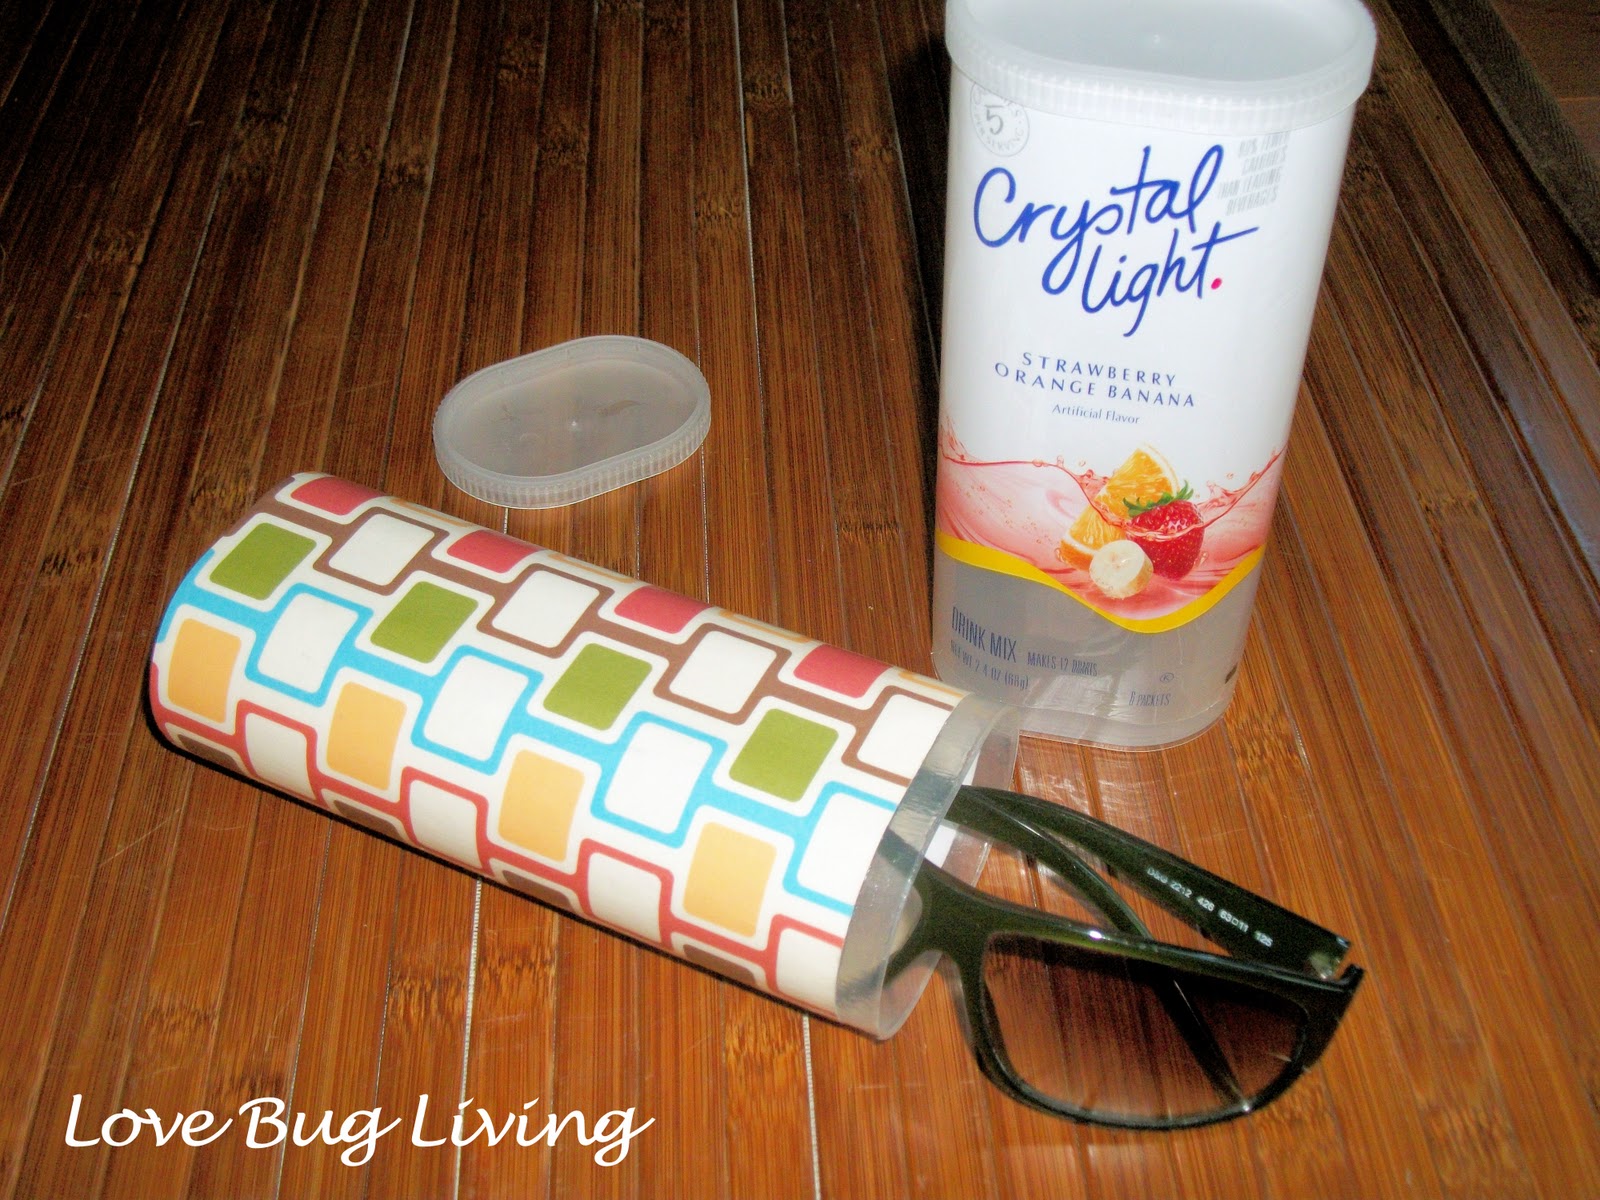 Craftaholics Anonymous®  18 Uses for Crystal Light Containers